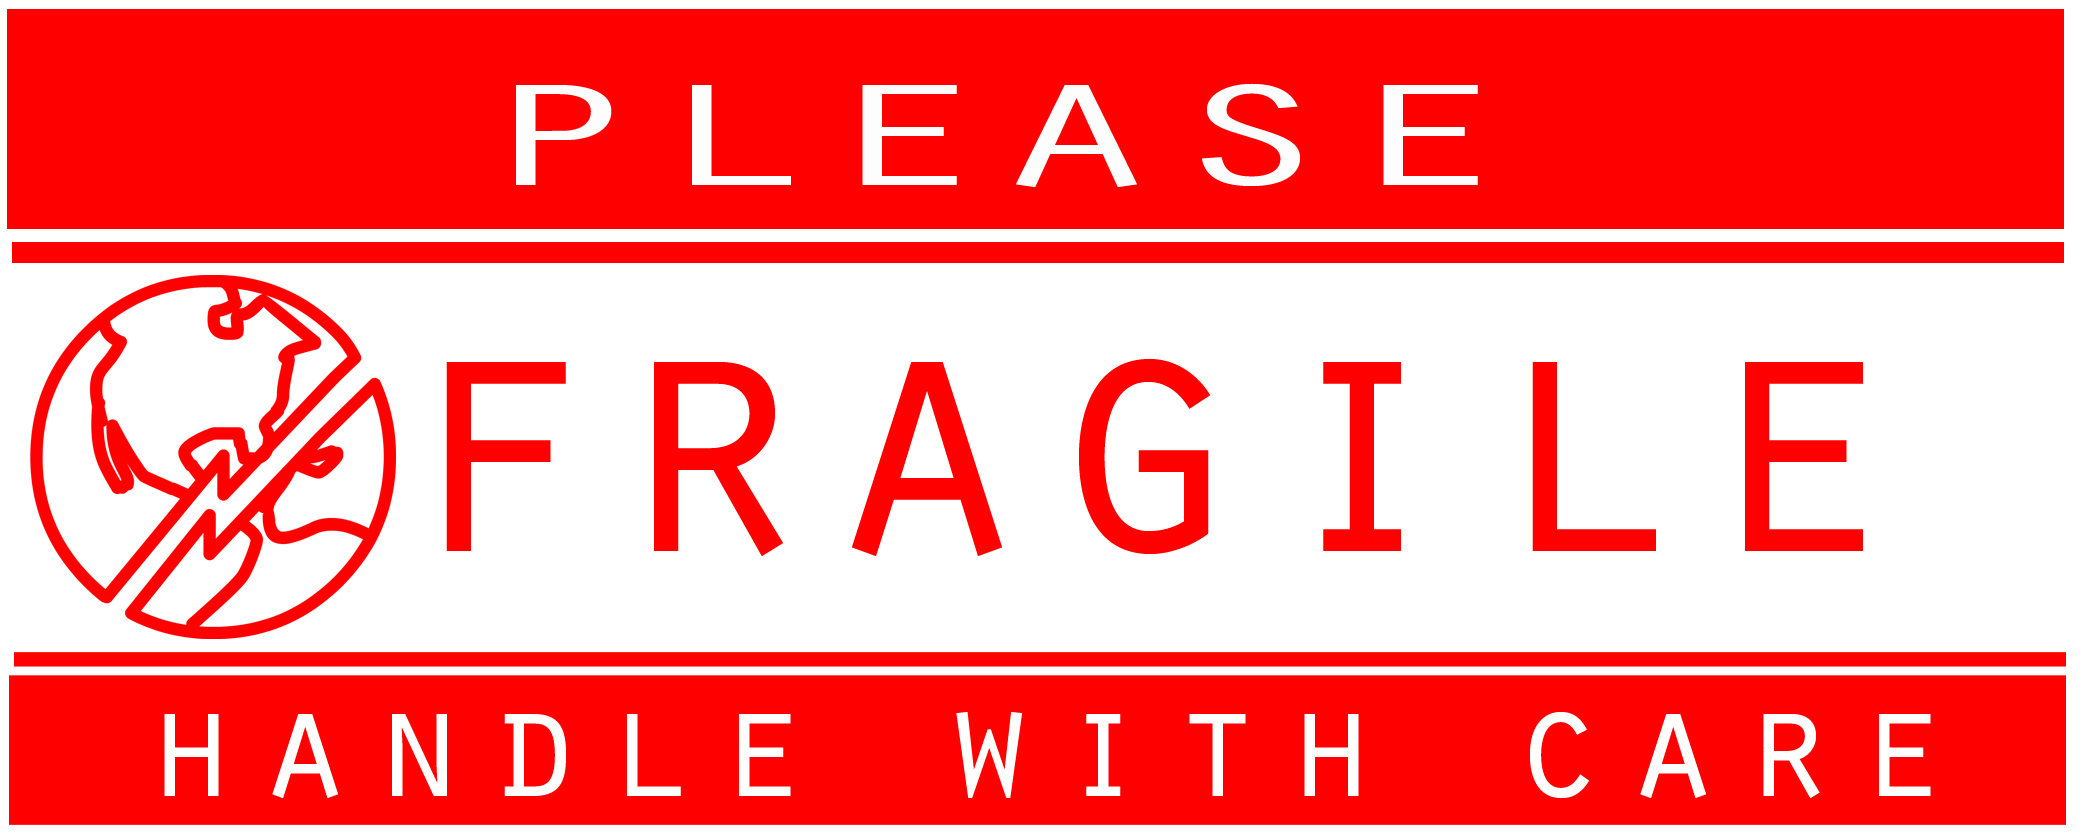 fragile-signs-printable-clipart-best